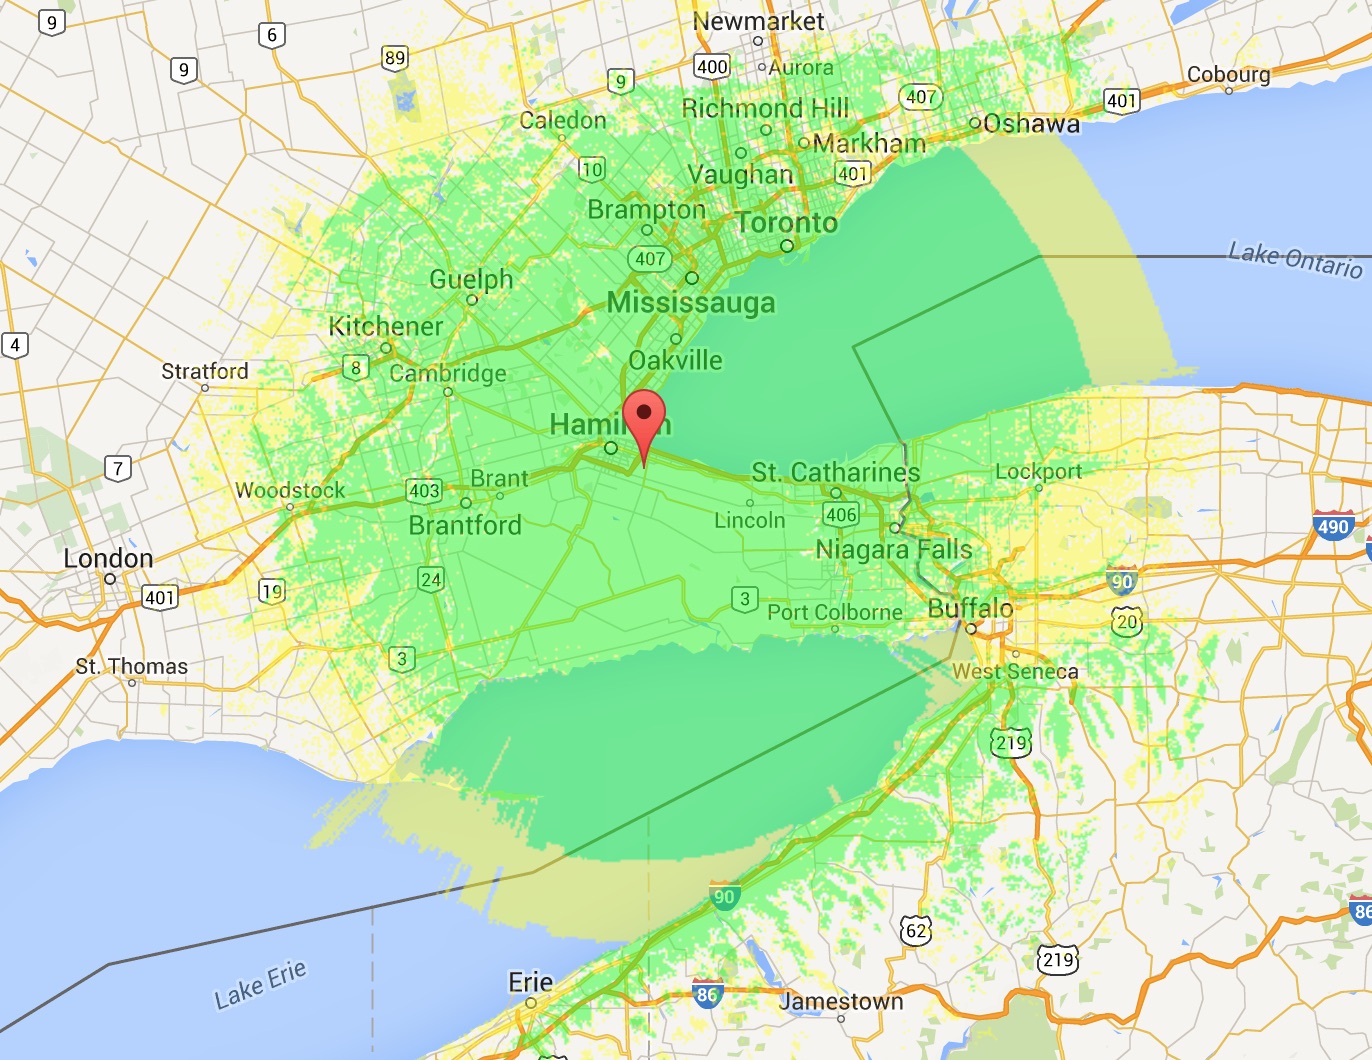 VE3UHM launched a DMR repeater in Hamilton, ON picture